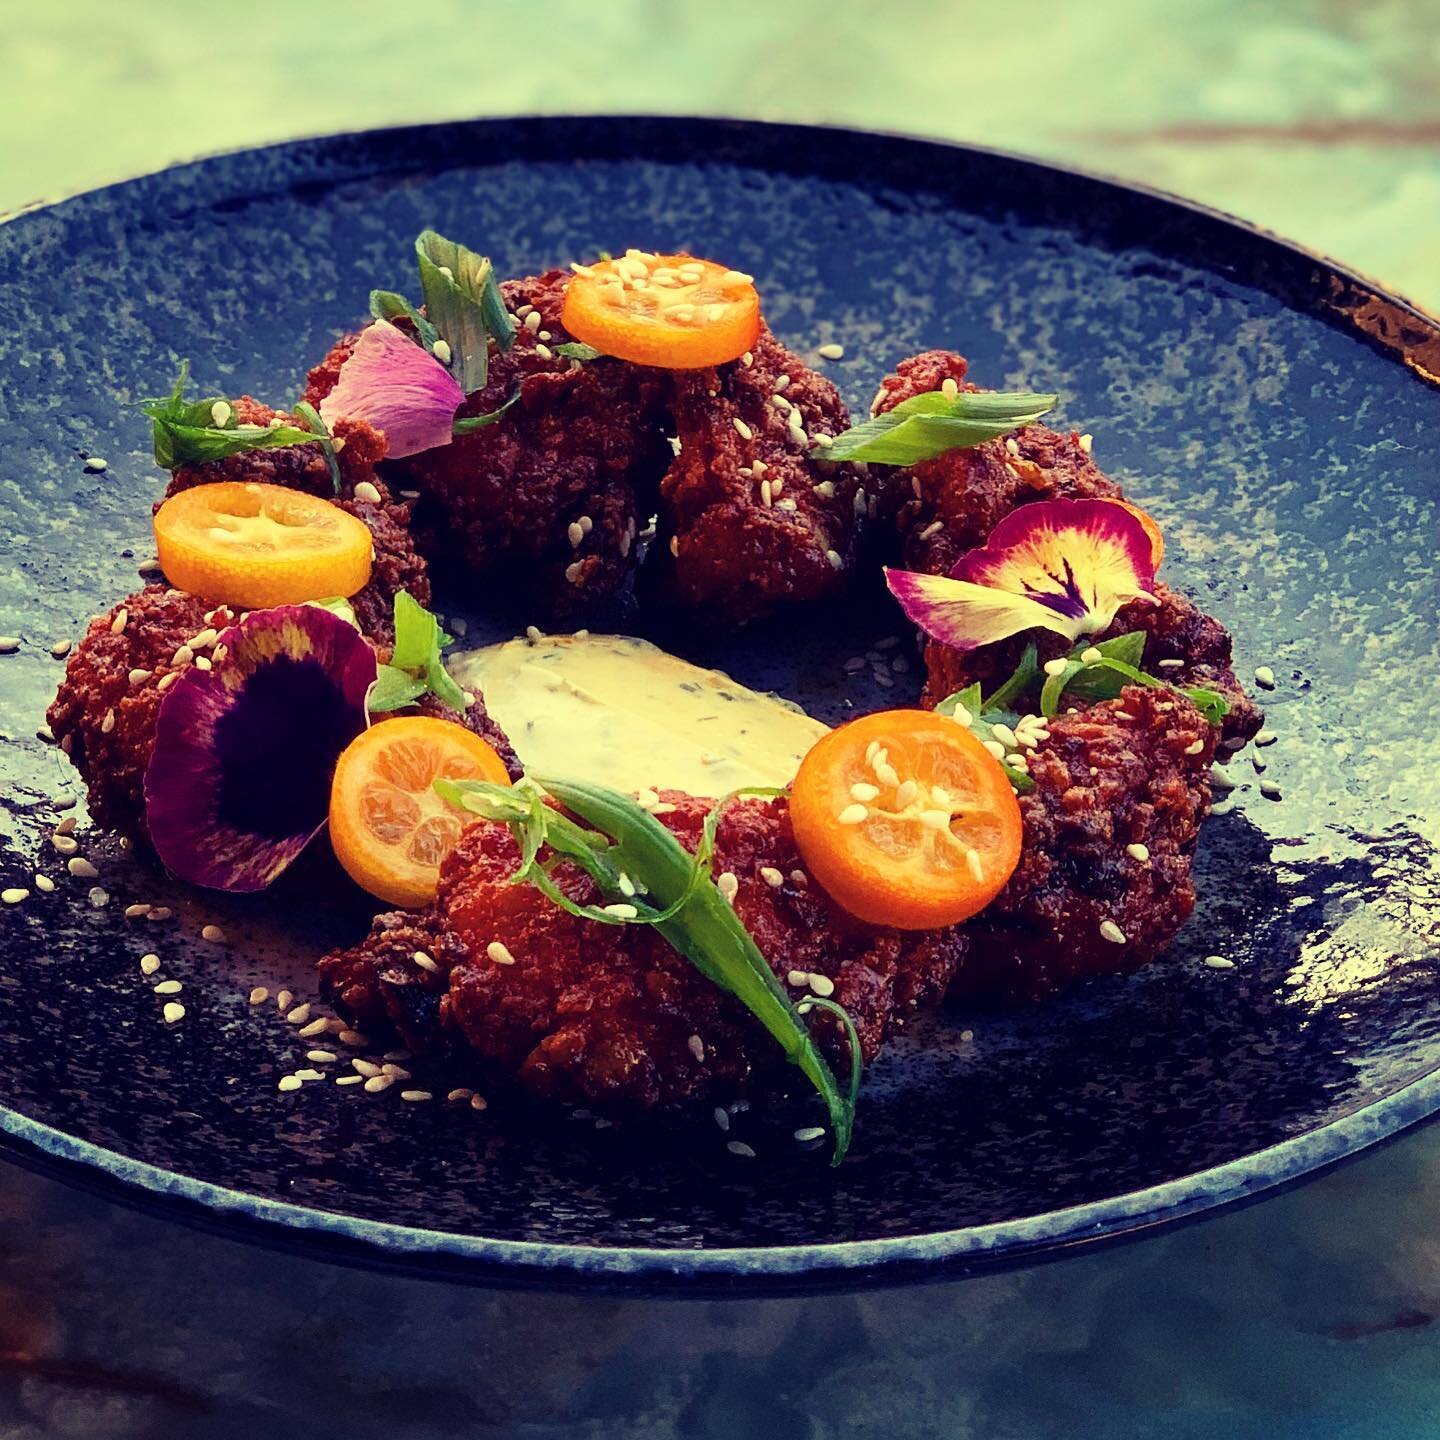 More beautiful things for your feed and your mouth from @bdrohadaflipphone, this is our take on boneless wings. Fried chicken thighs tossed in burnt orange and chili, sesame, preserved kumquat ranch, and scallions. You know you want some. 🍗🍊🔥#eatl